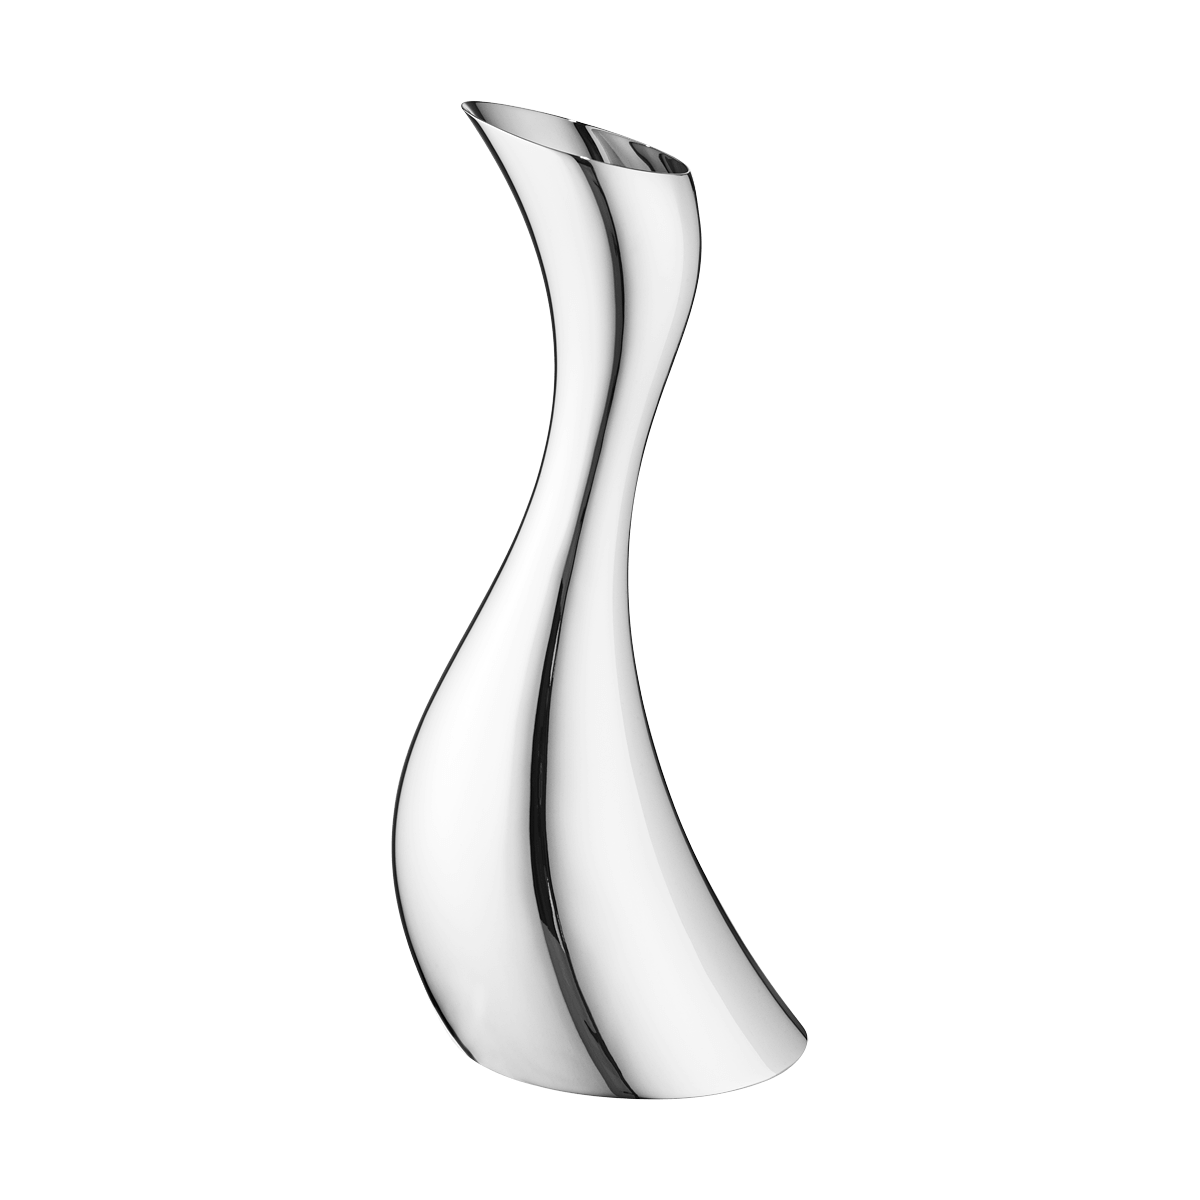 georg jensen mirror polished stainless steel curved cobra pitcher 3586611